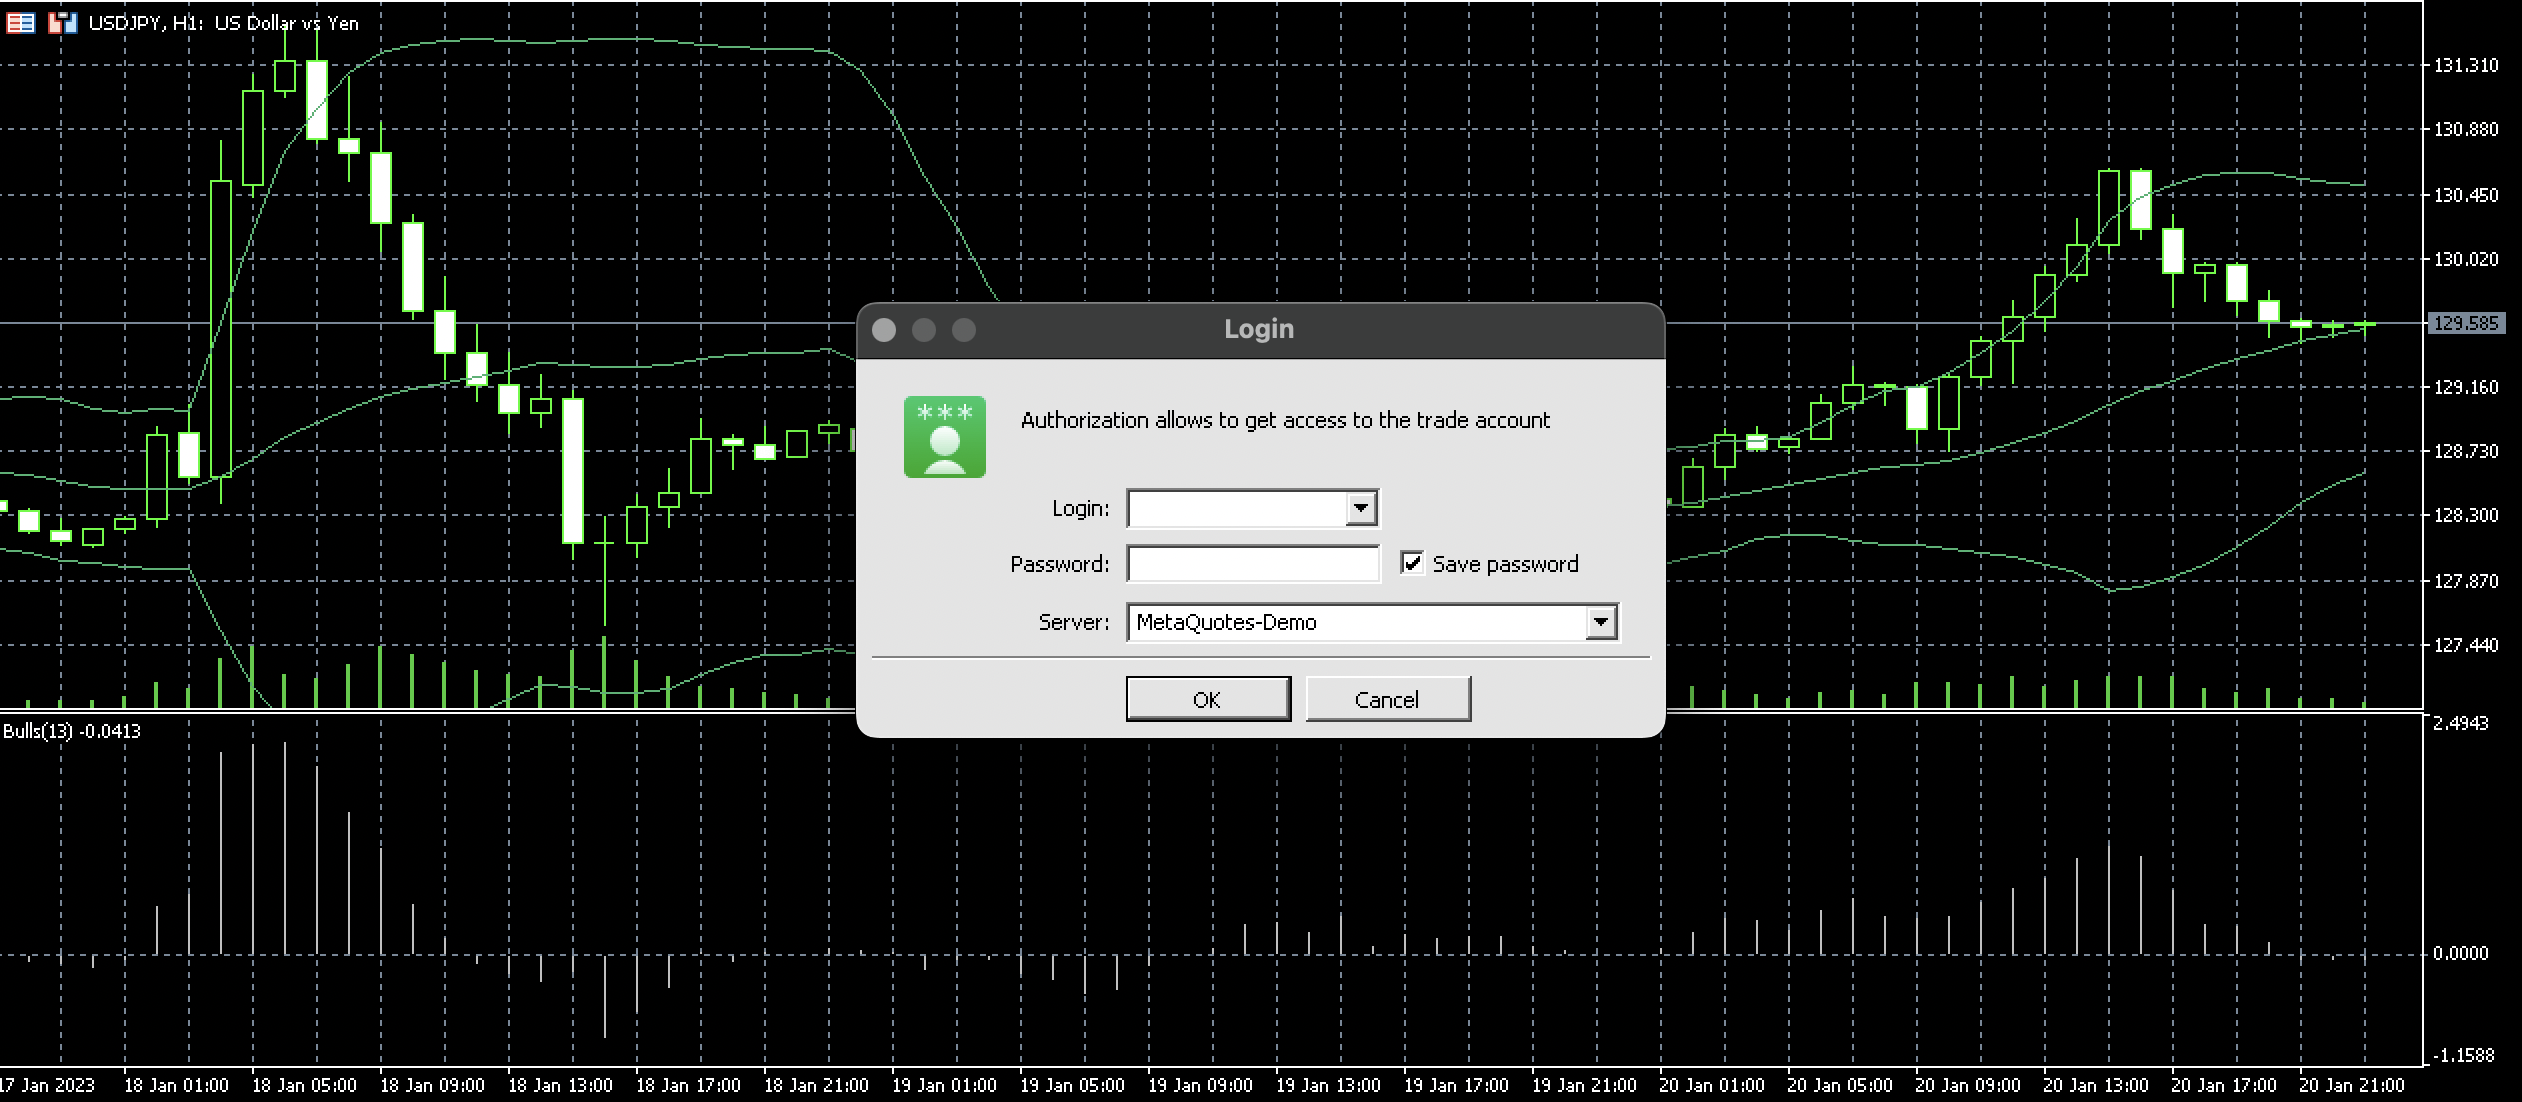 The MetaTrader 5 Login to trade account form in the file section